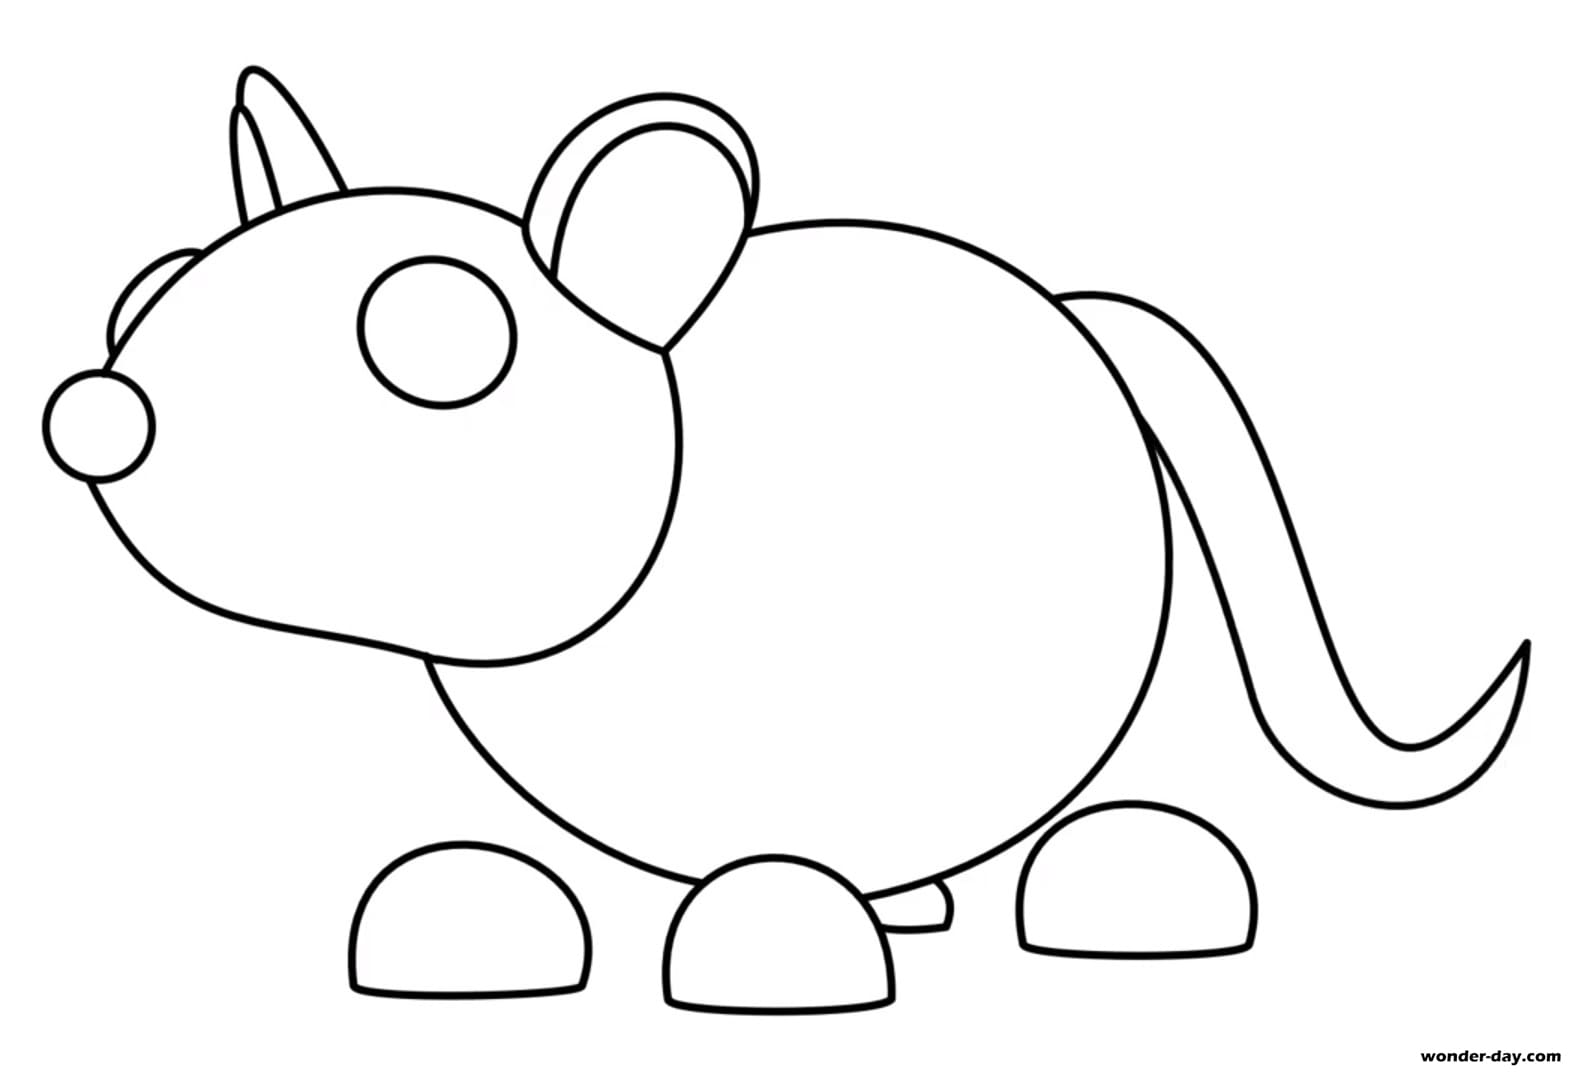 Adopt Me Coloring Pages Coloring Home - roblox coloring pages adopt me pets